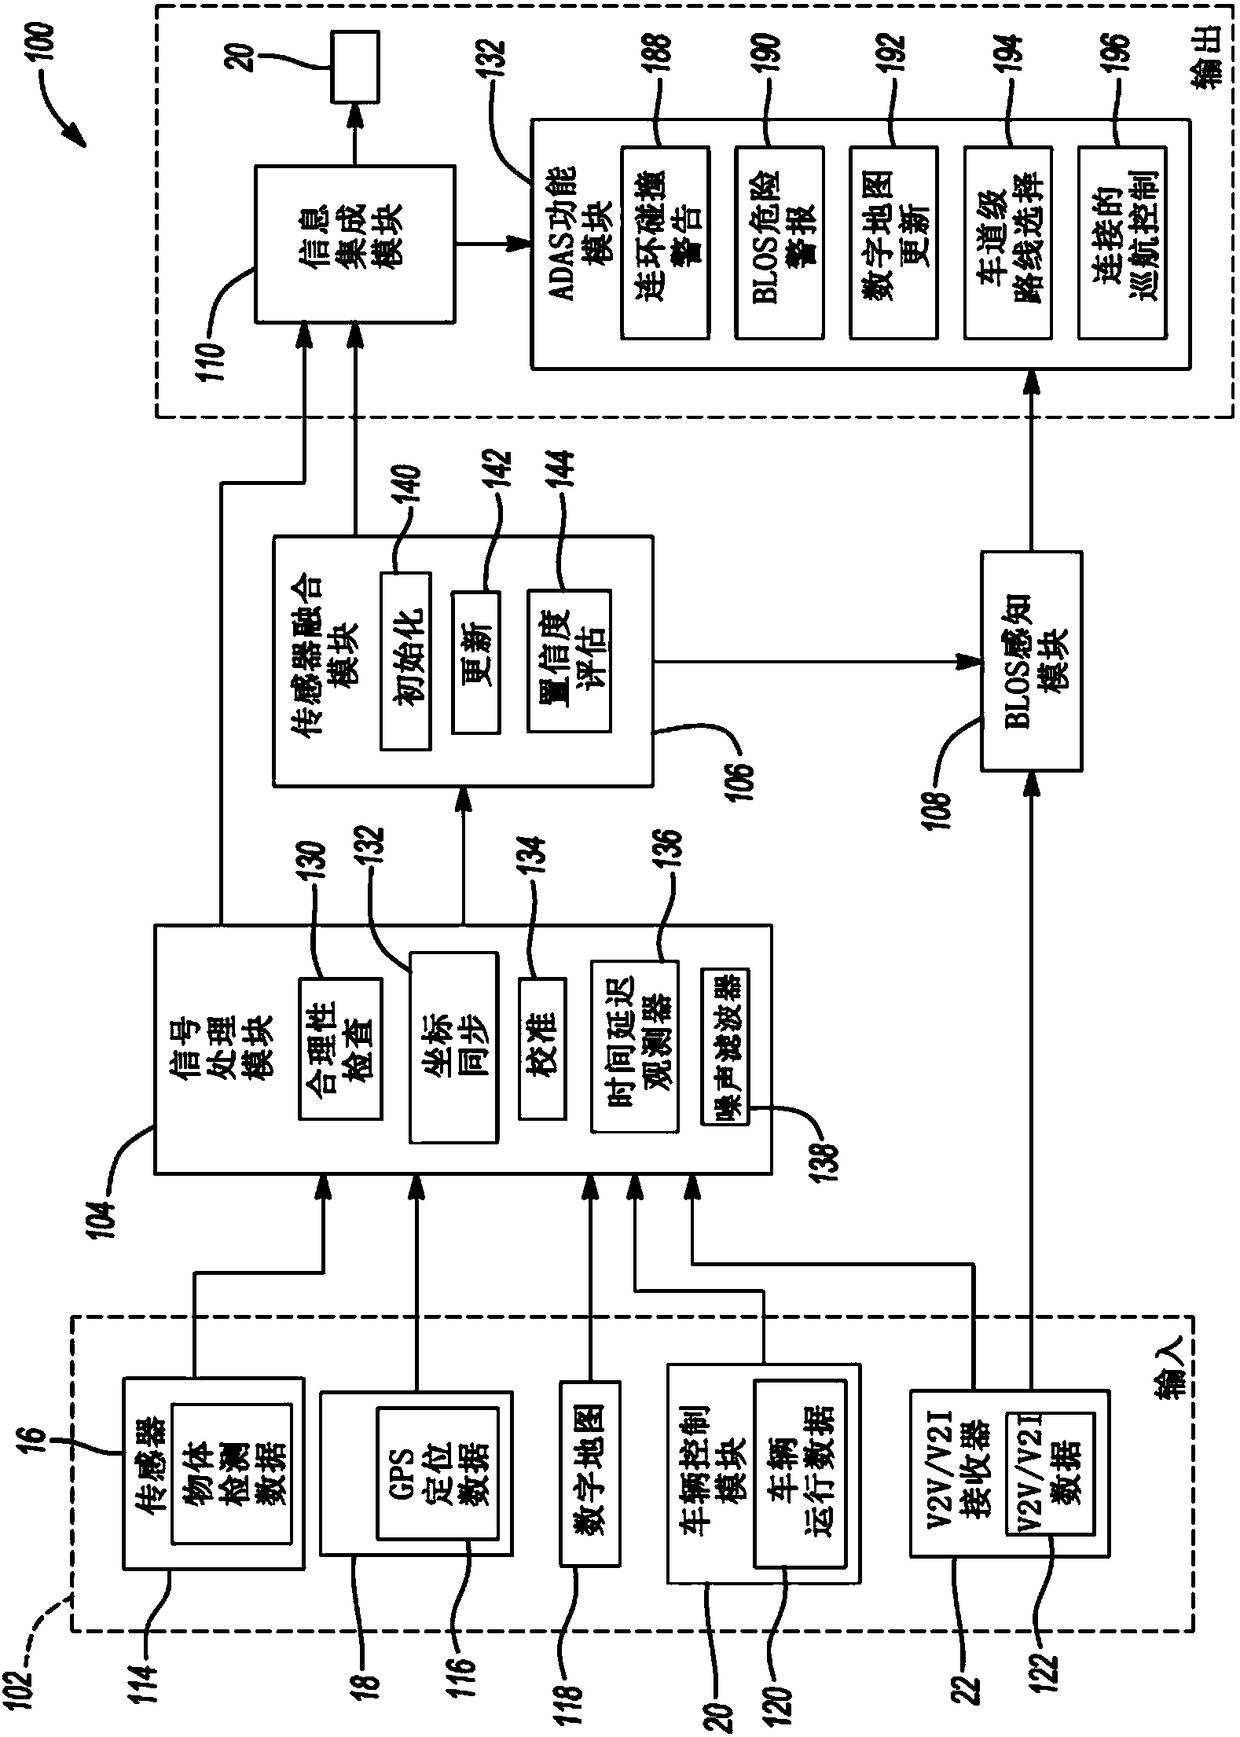 Method and system for performing advanced driver assistance system functions using beyond line-of-sight situational awareness